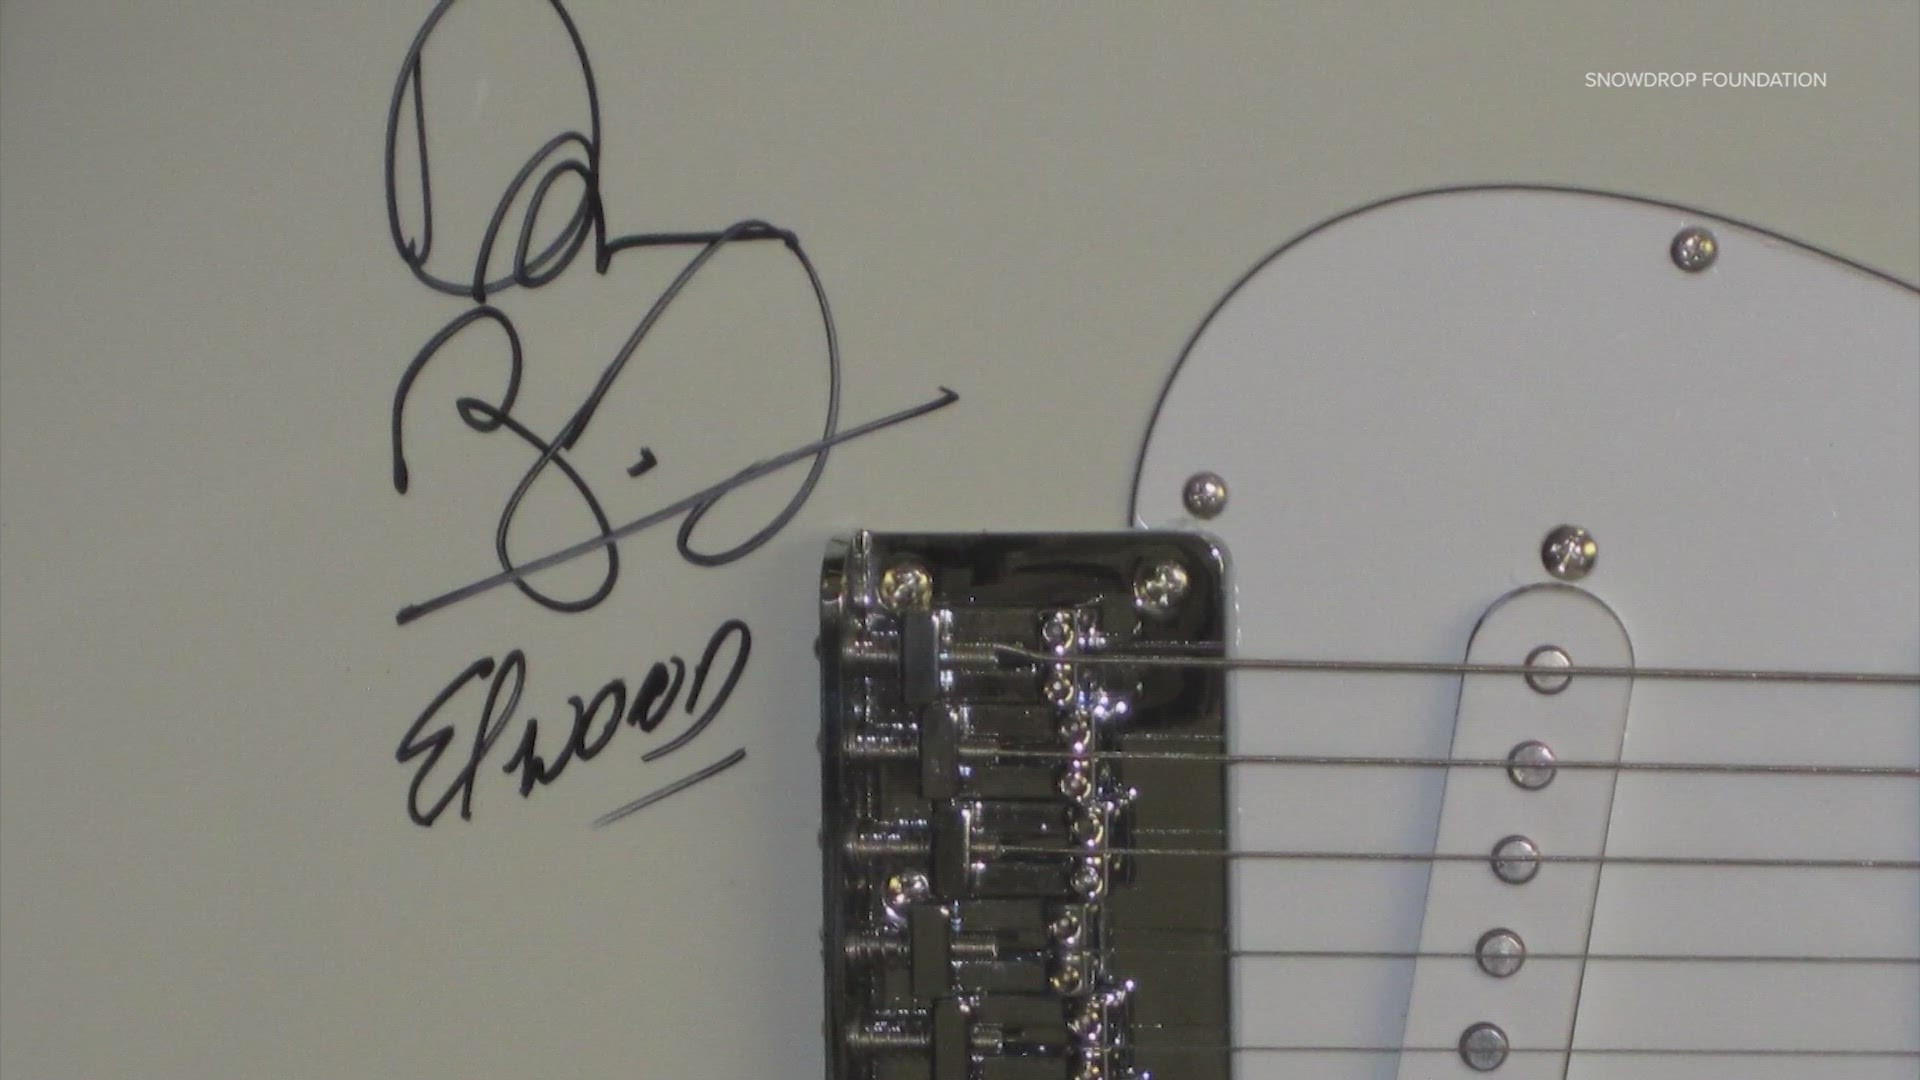 The items stolen in the storage unit burglary included guitars autographed by rock legends Steven Tyler, ZZ Top and Pat Benatar.